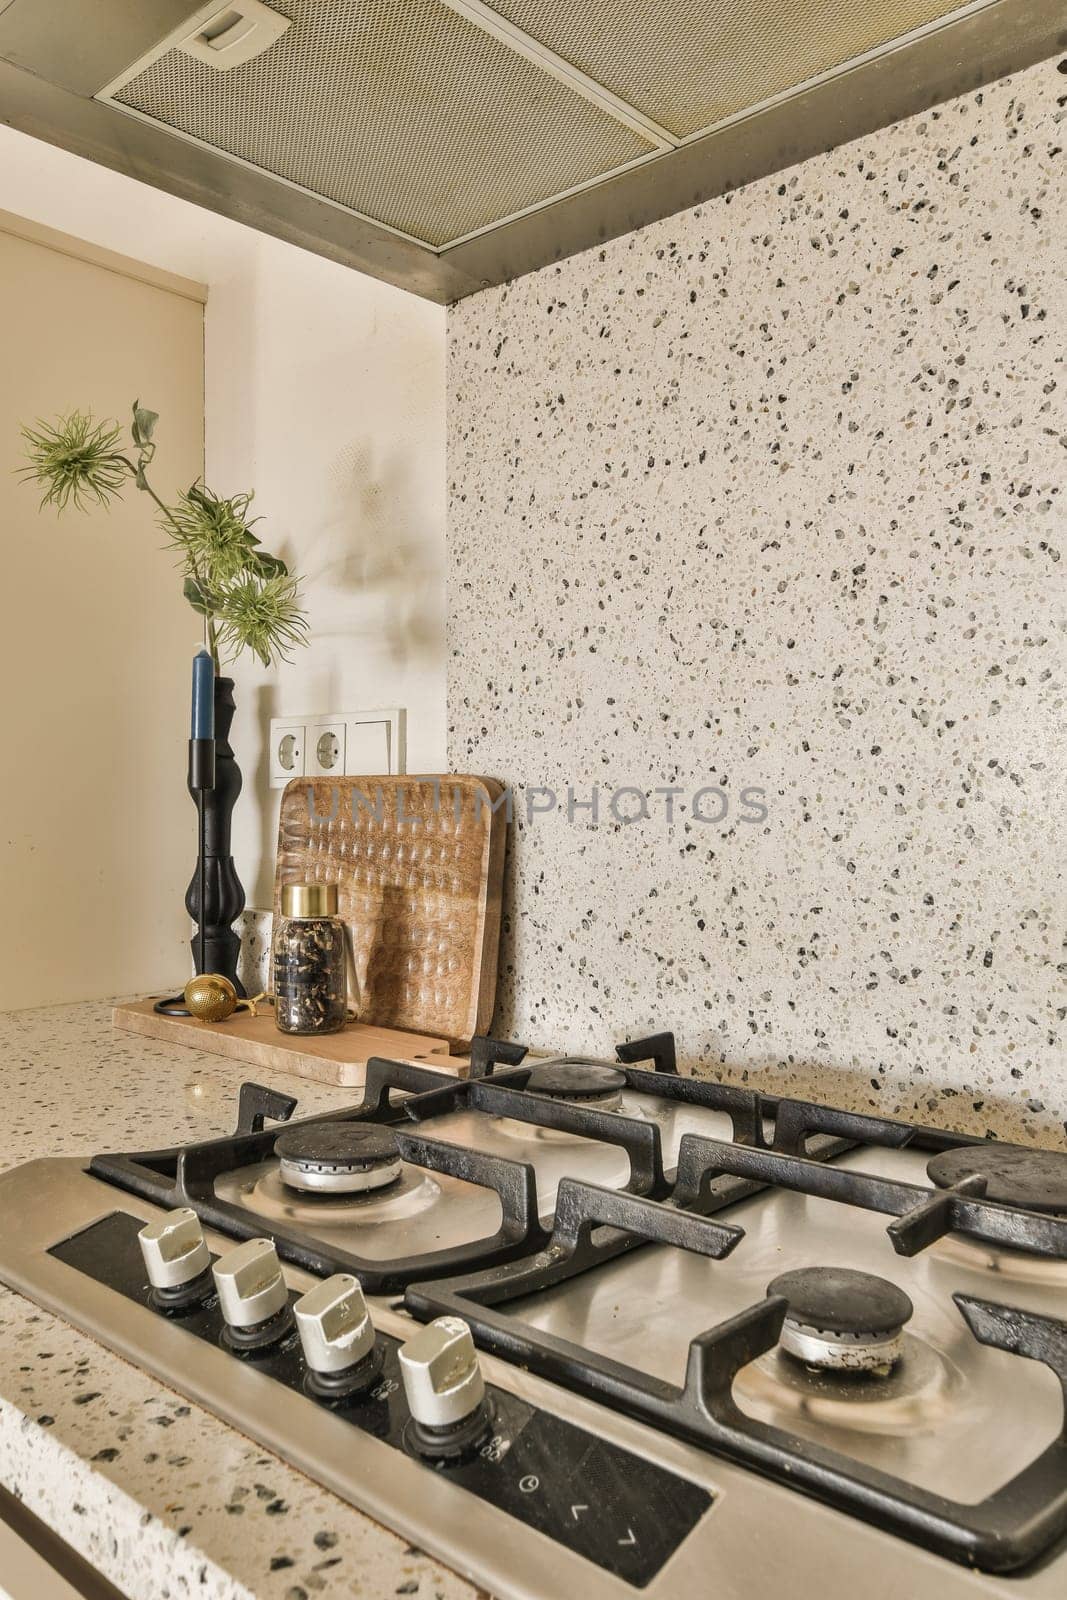 a kitchen with granite counter tops and stoves in the fore - image was taken from an article published on flickonly com